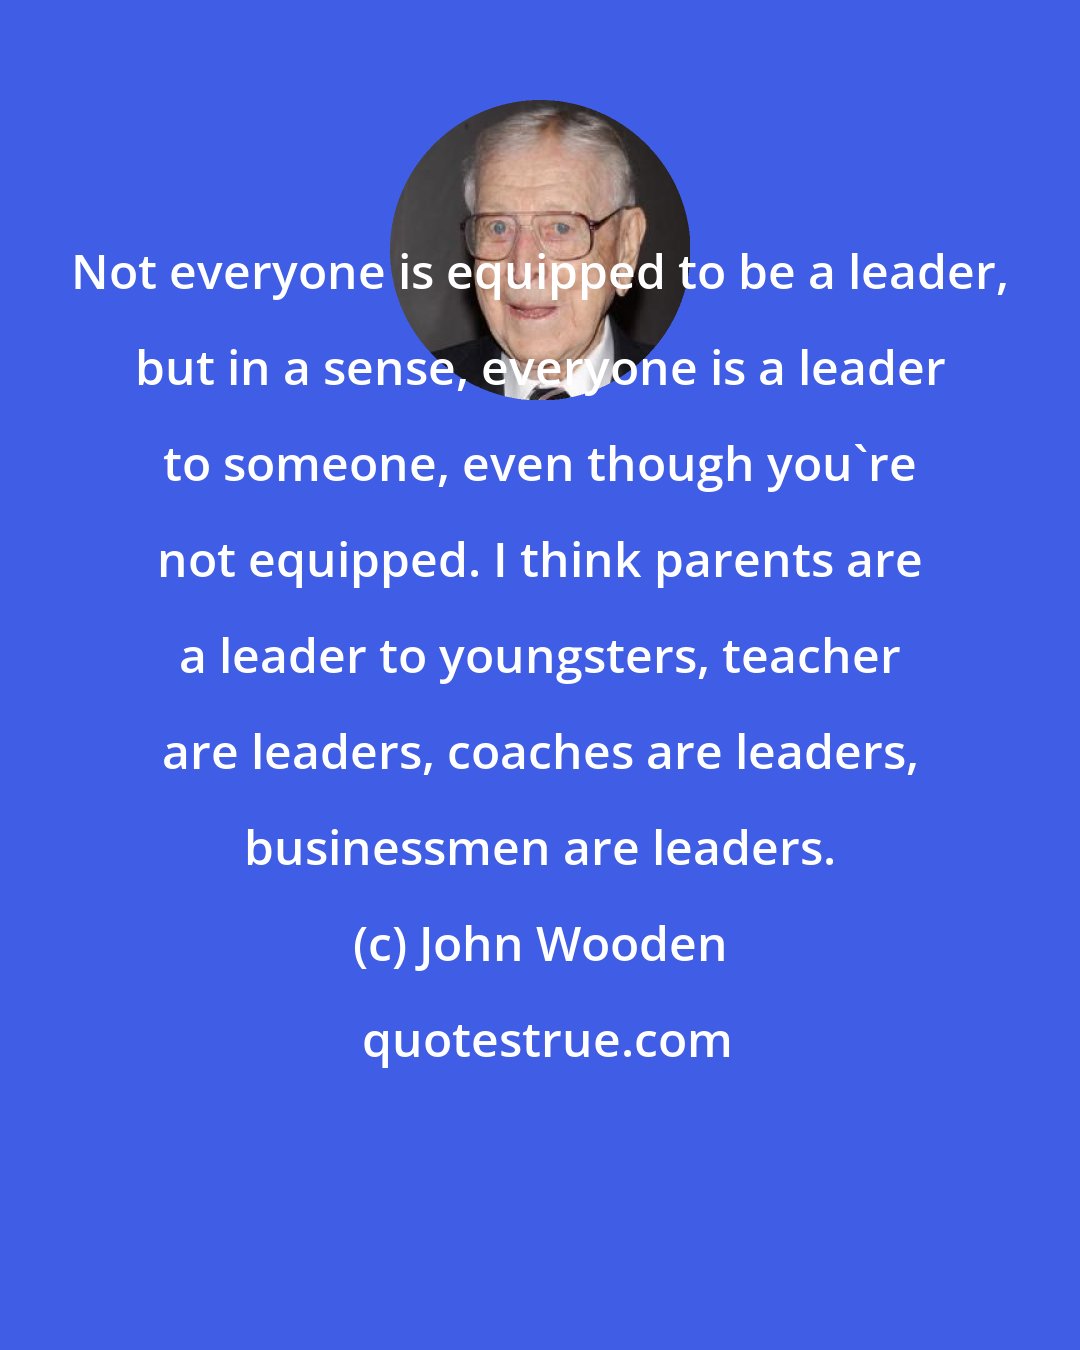 John Wooden: Not everyone is equipped to be a leader, but in a sense, everyone is a leader to someone, even though you're not equipped. I think parents are a leader to youngsters, teacher are leaders, coaches are leaders, businessmen are leaders.